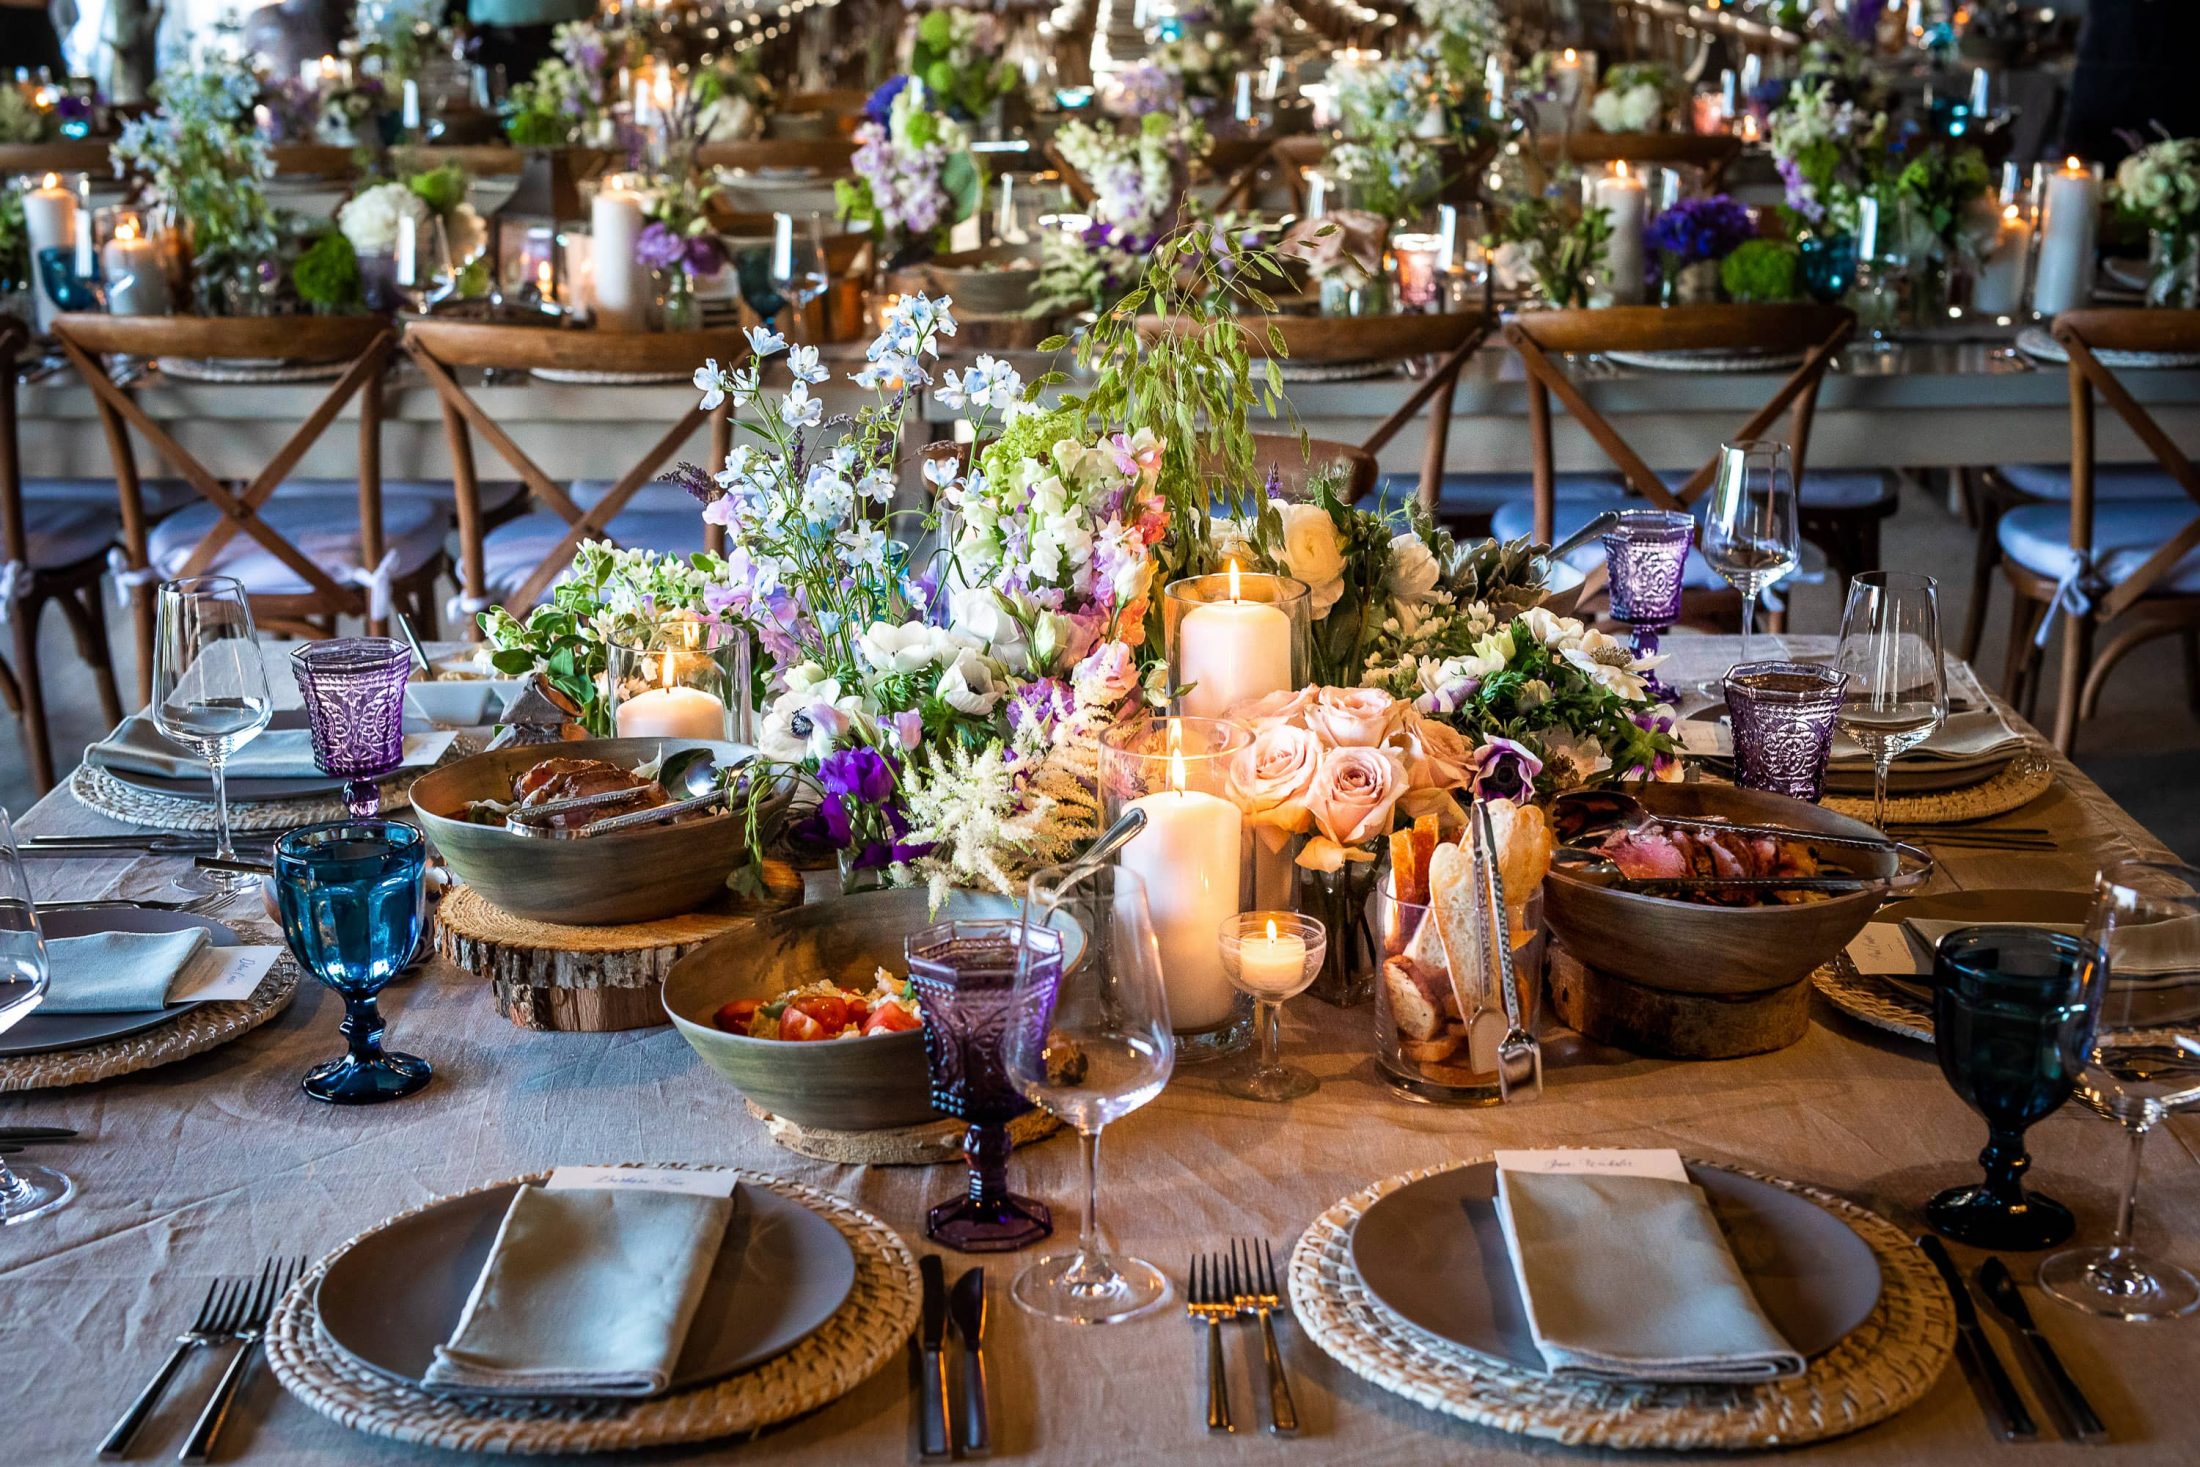 Reception floral table decor at this Hamptons wedding weekend held at The Parrish Museum | Photo by Roey Yohai Studio